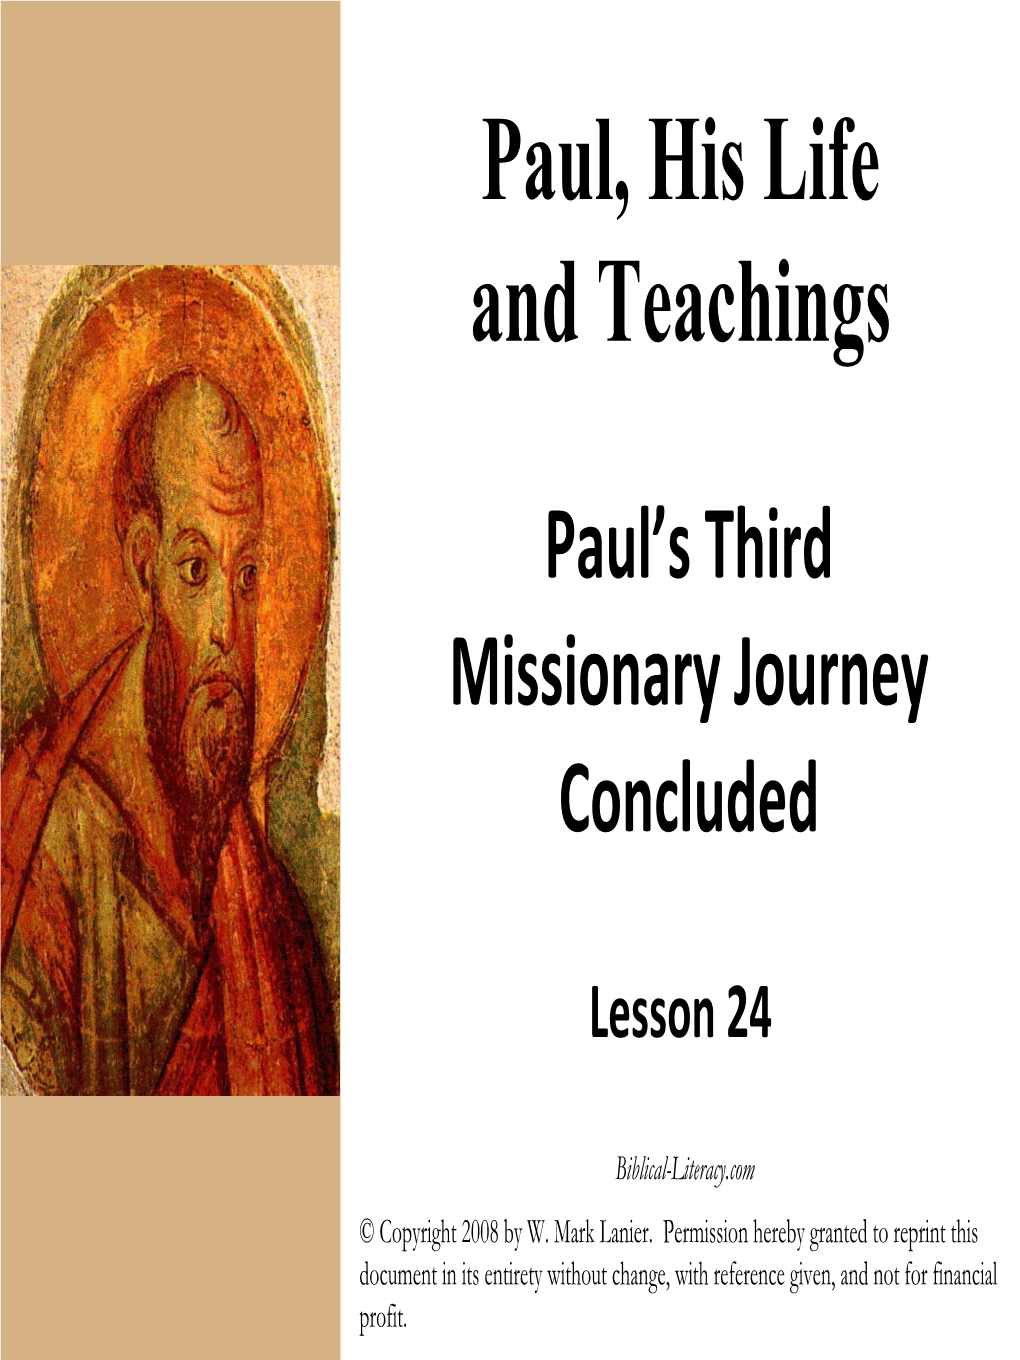 Paul's Third Missionary Journey Concluded